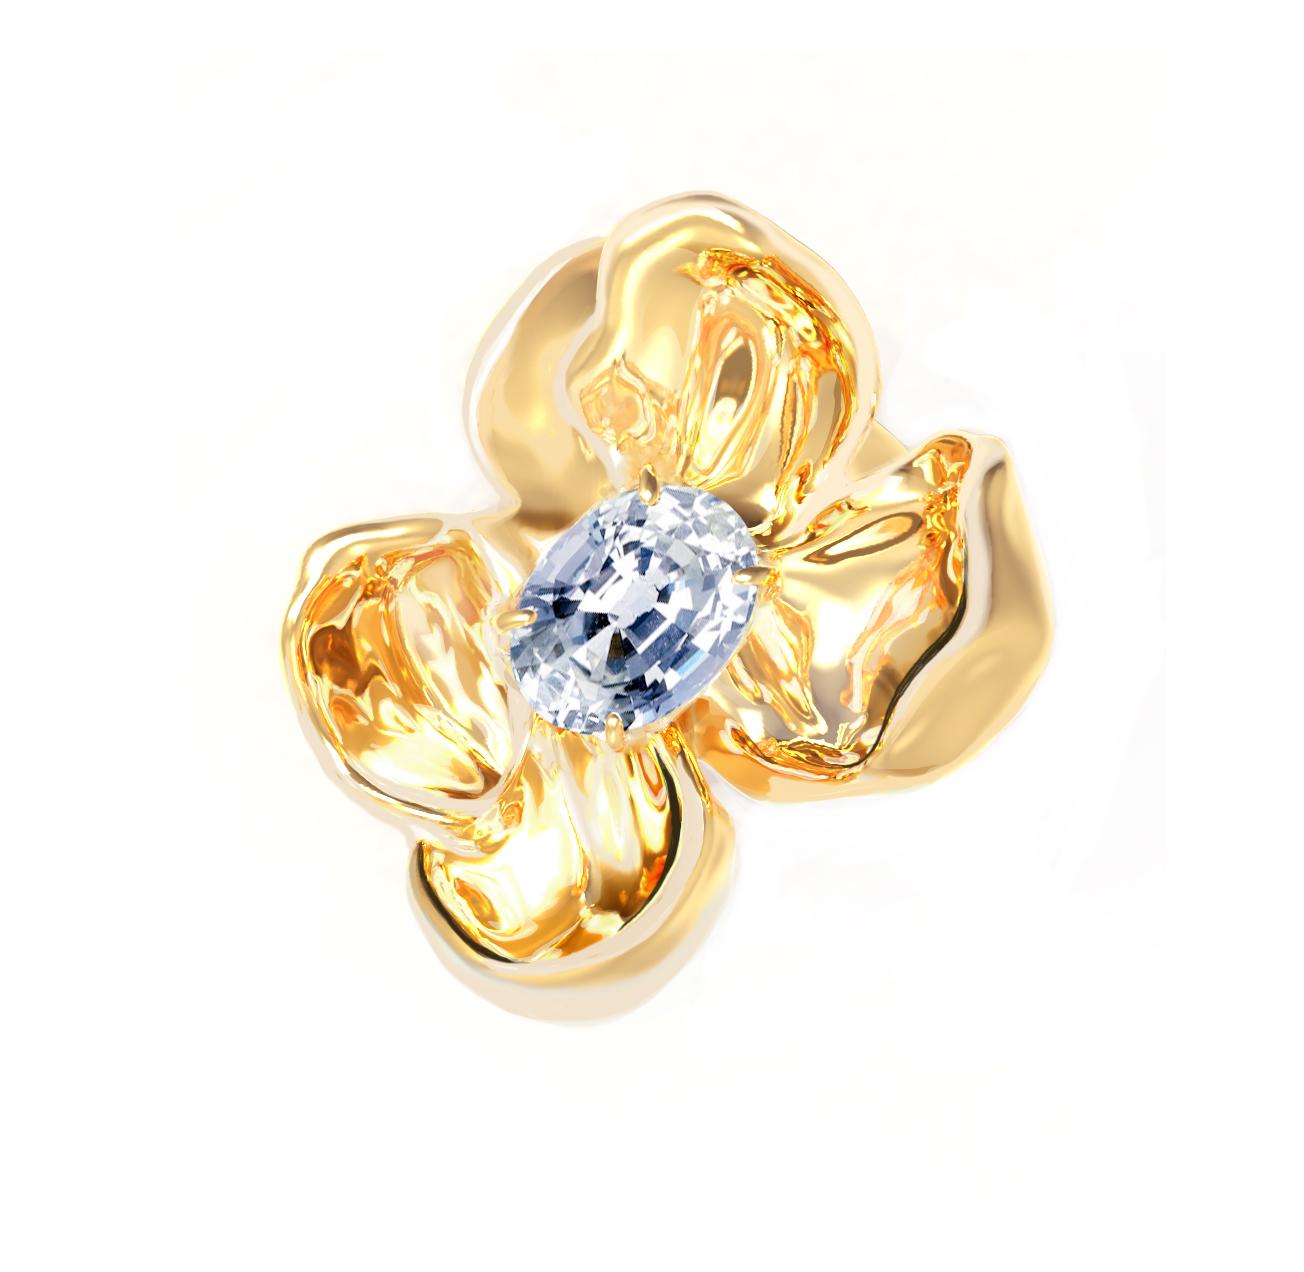 This Magnolia Flower contemporary brooch is in 18 karat yellow gold with clear and shiny light blue sapphire, 0.65 Carats. The water-surface of the gem multiplies the light, mirroring on the golden petals. The weight is 8.5 gr. The ring from this